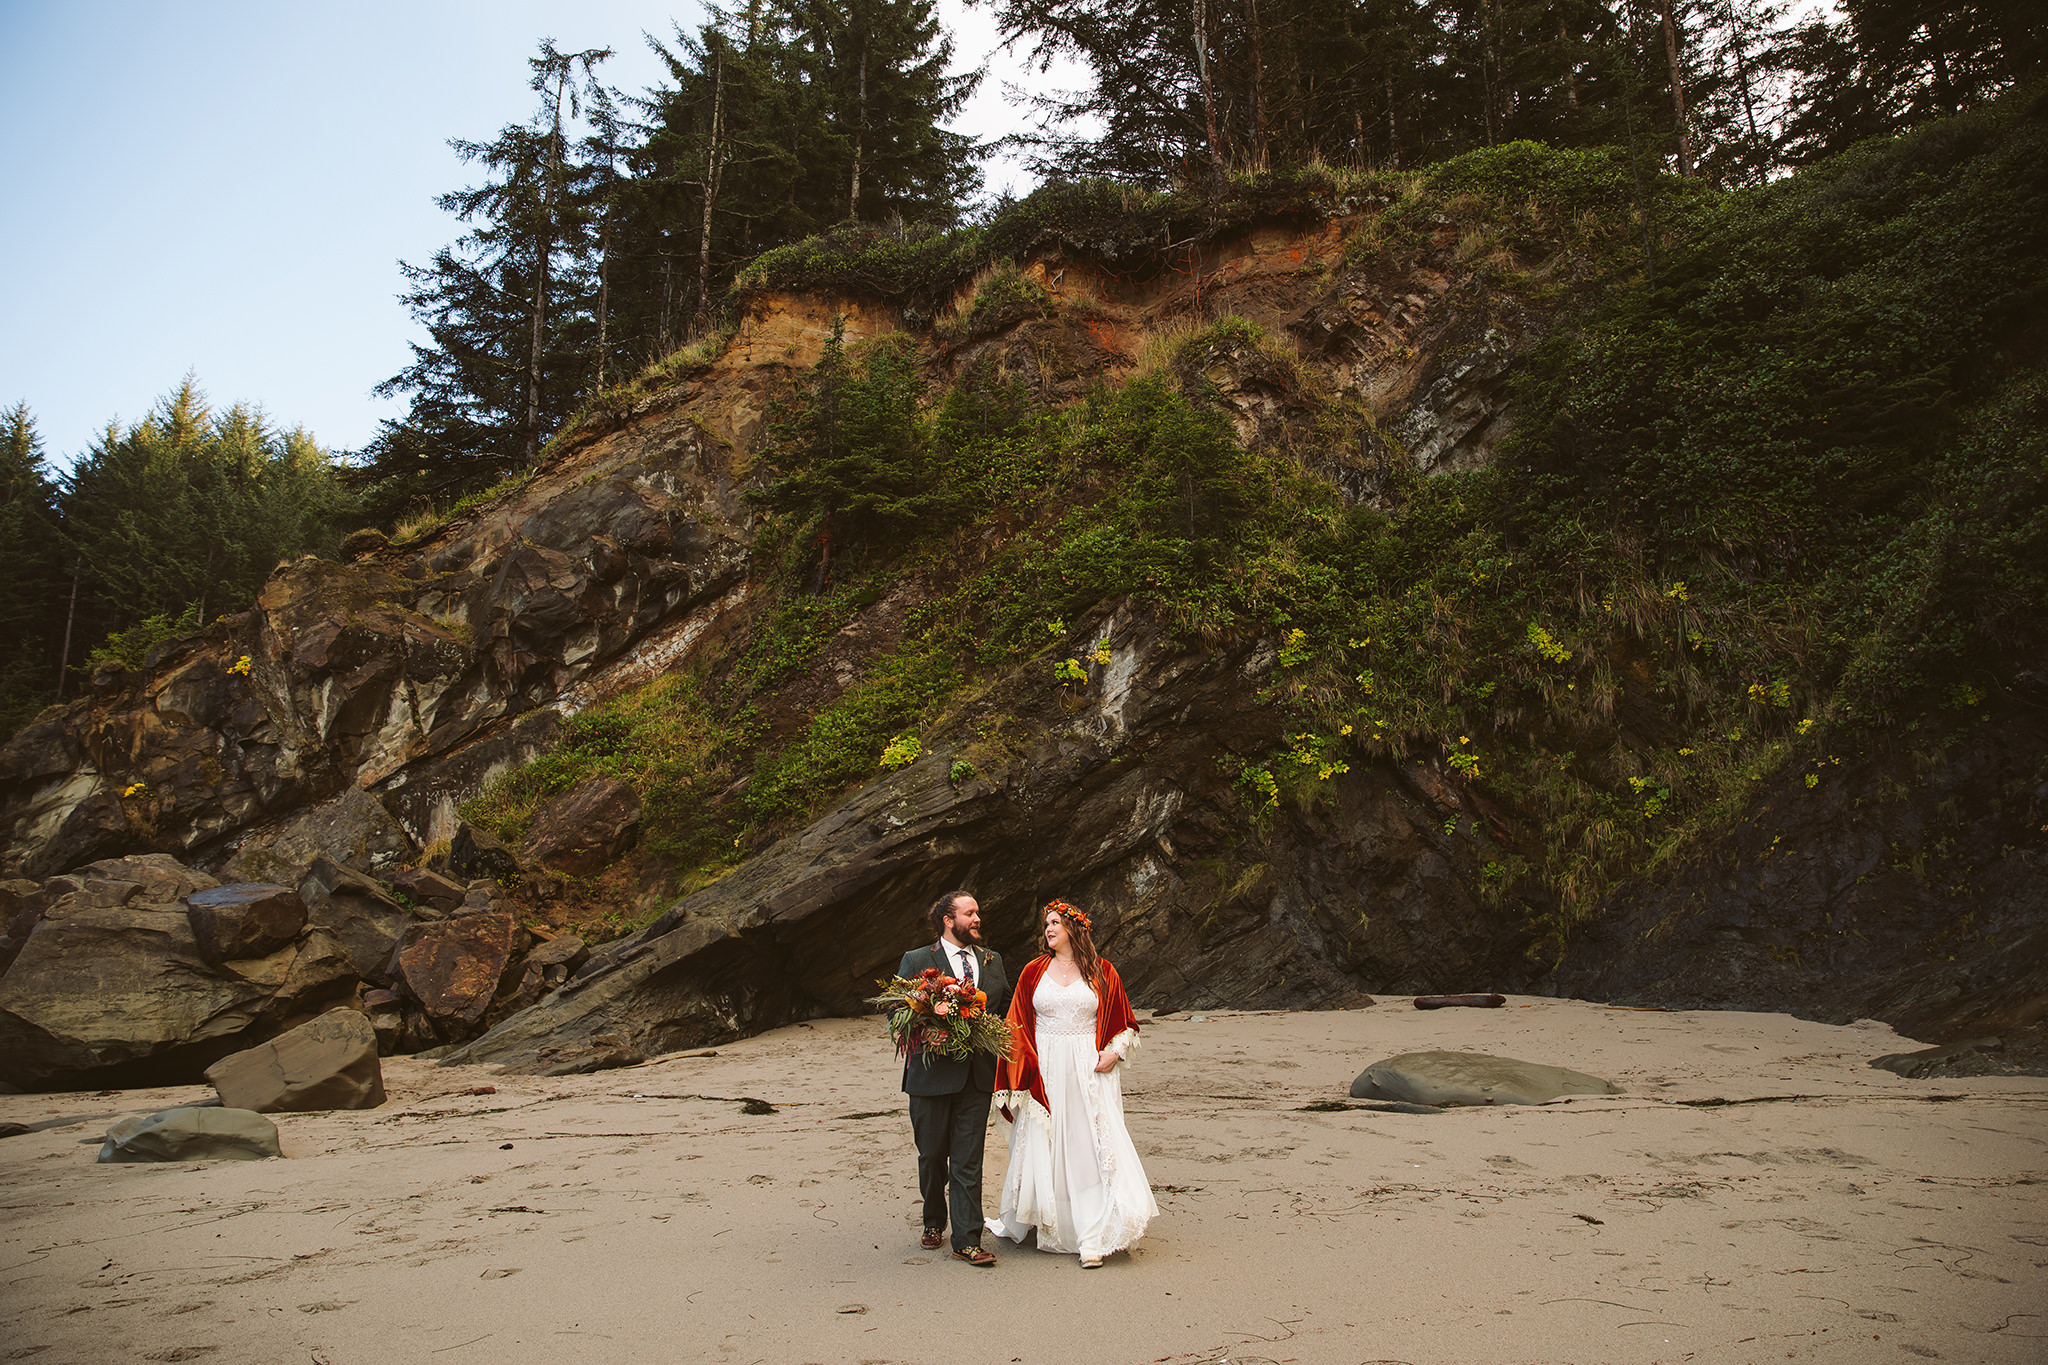 A bride and groom walking on the beach during their Pacific Northwest elopement ini Oregon